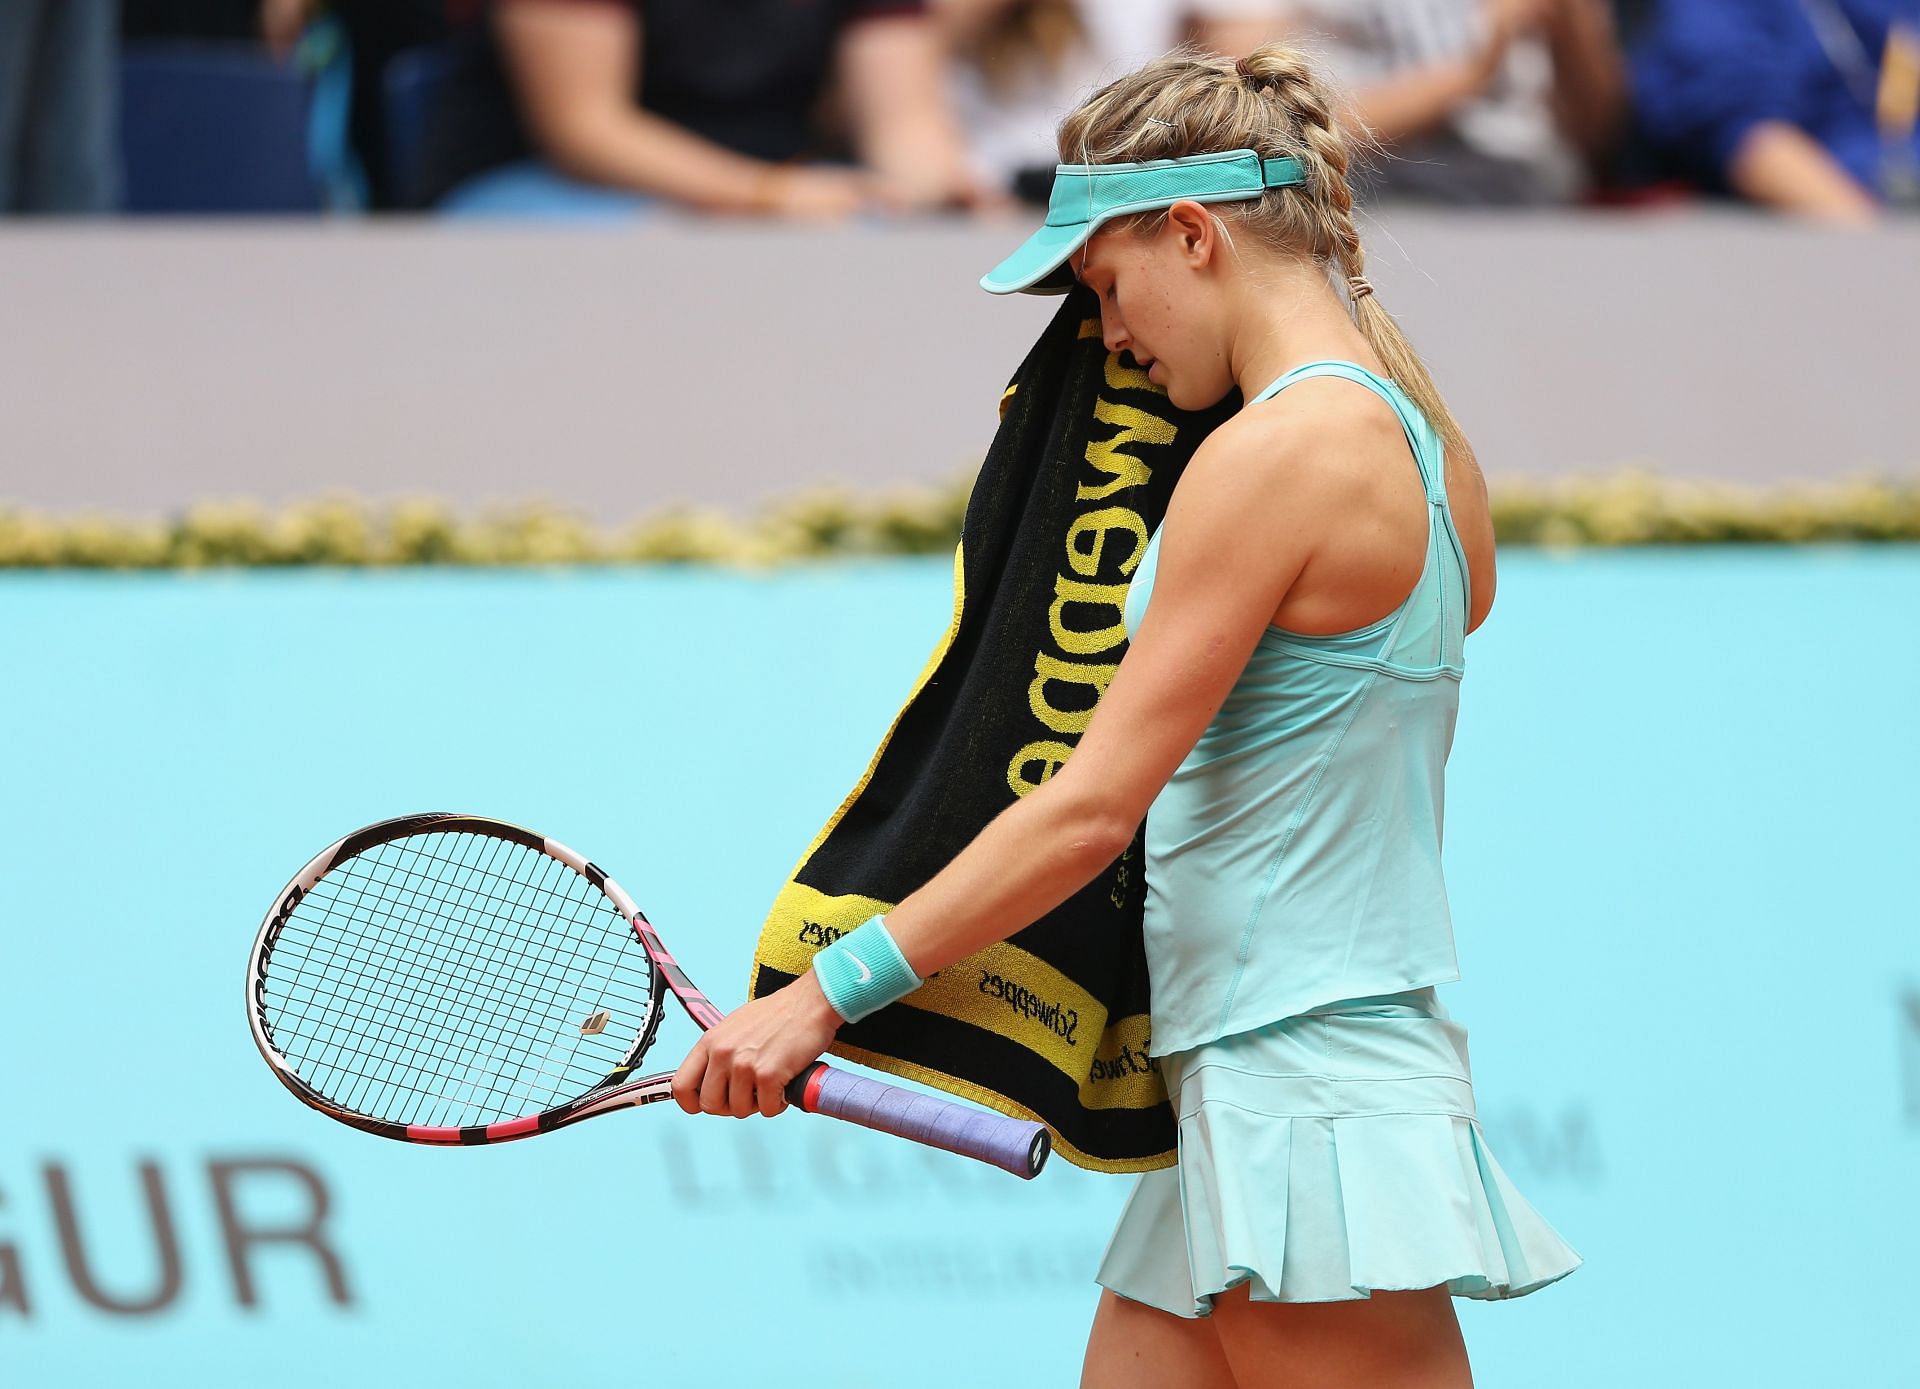 Eugenie Bouchard recently suffered from a bout of food poisoning